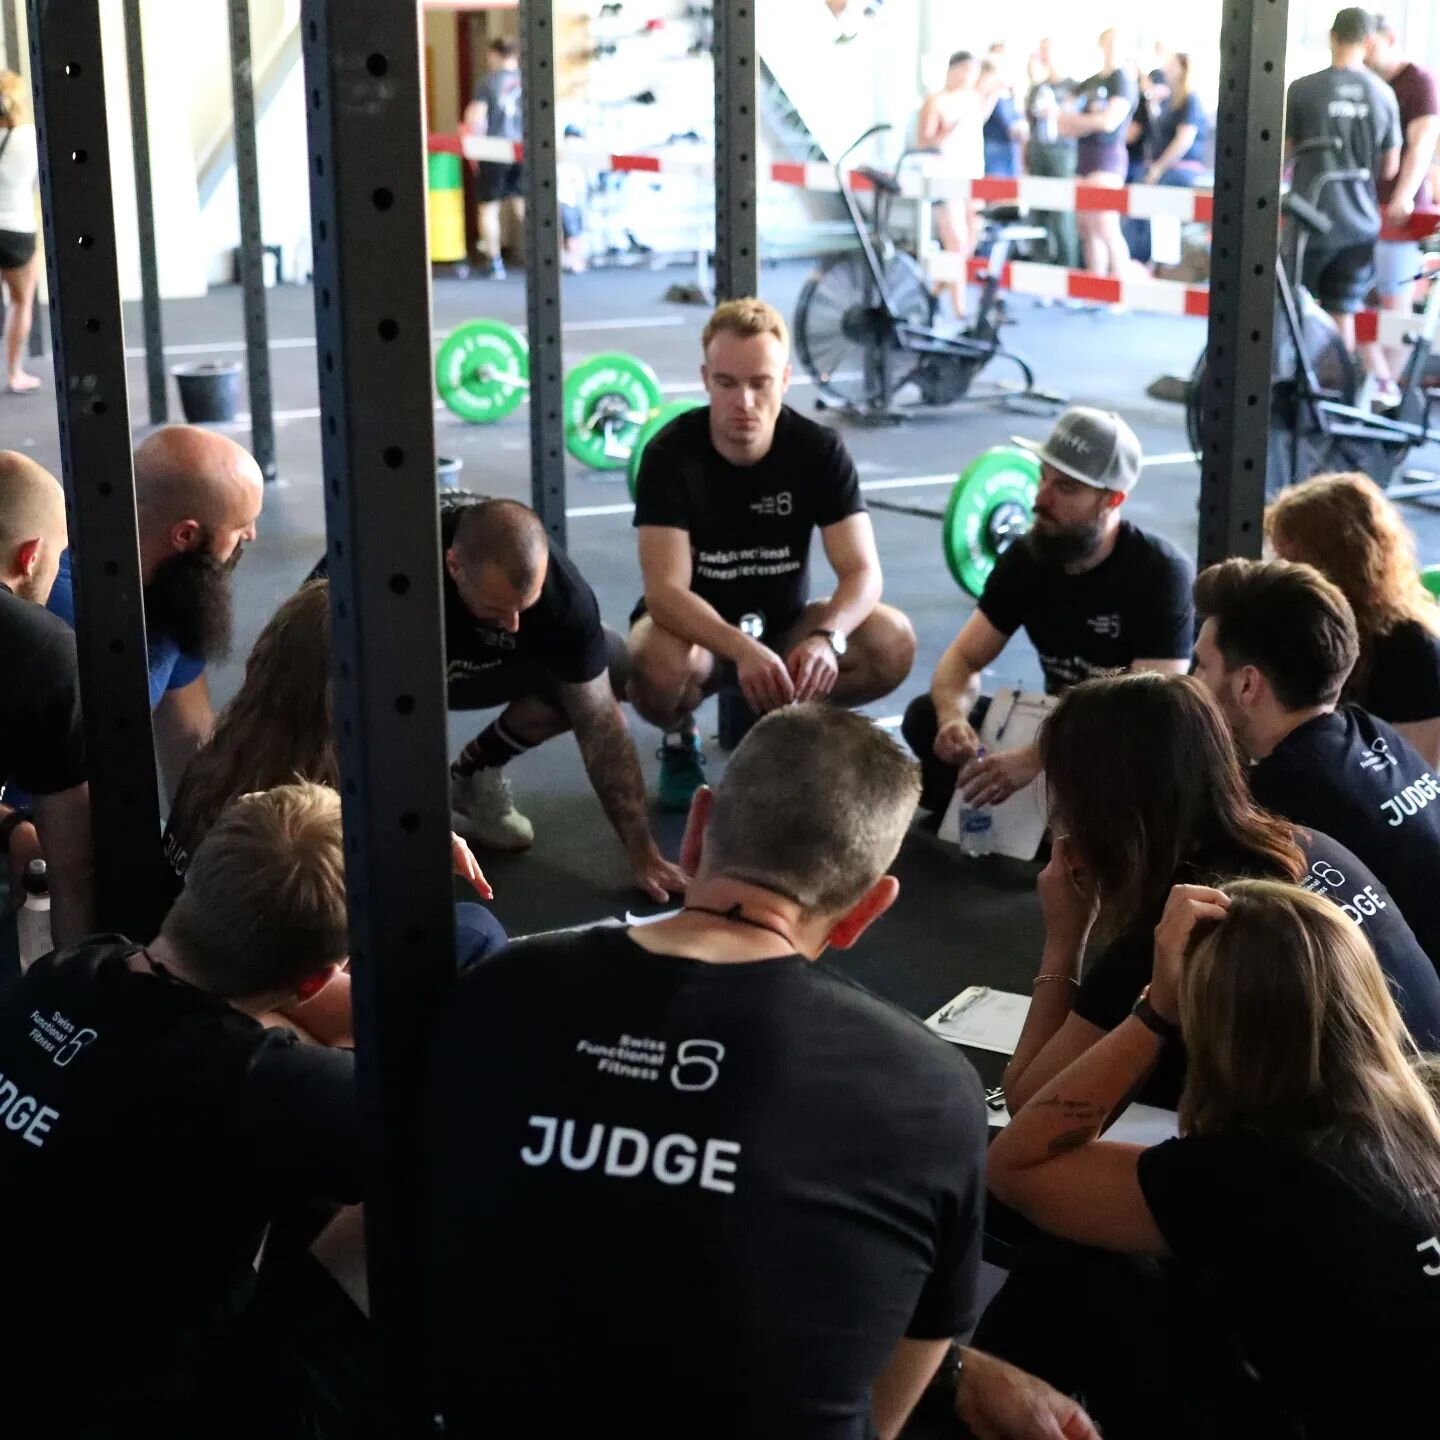 Volunteers for the Swiss Championships:

The Swiss Championships will take place on 17th and 18th August 2024 at Crossfit Quantum @quantumcrossfit, Effretikon Zurich.

In order to organise the event, we depend on helpers and technical officers (TO).
